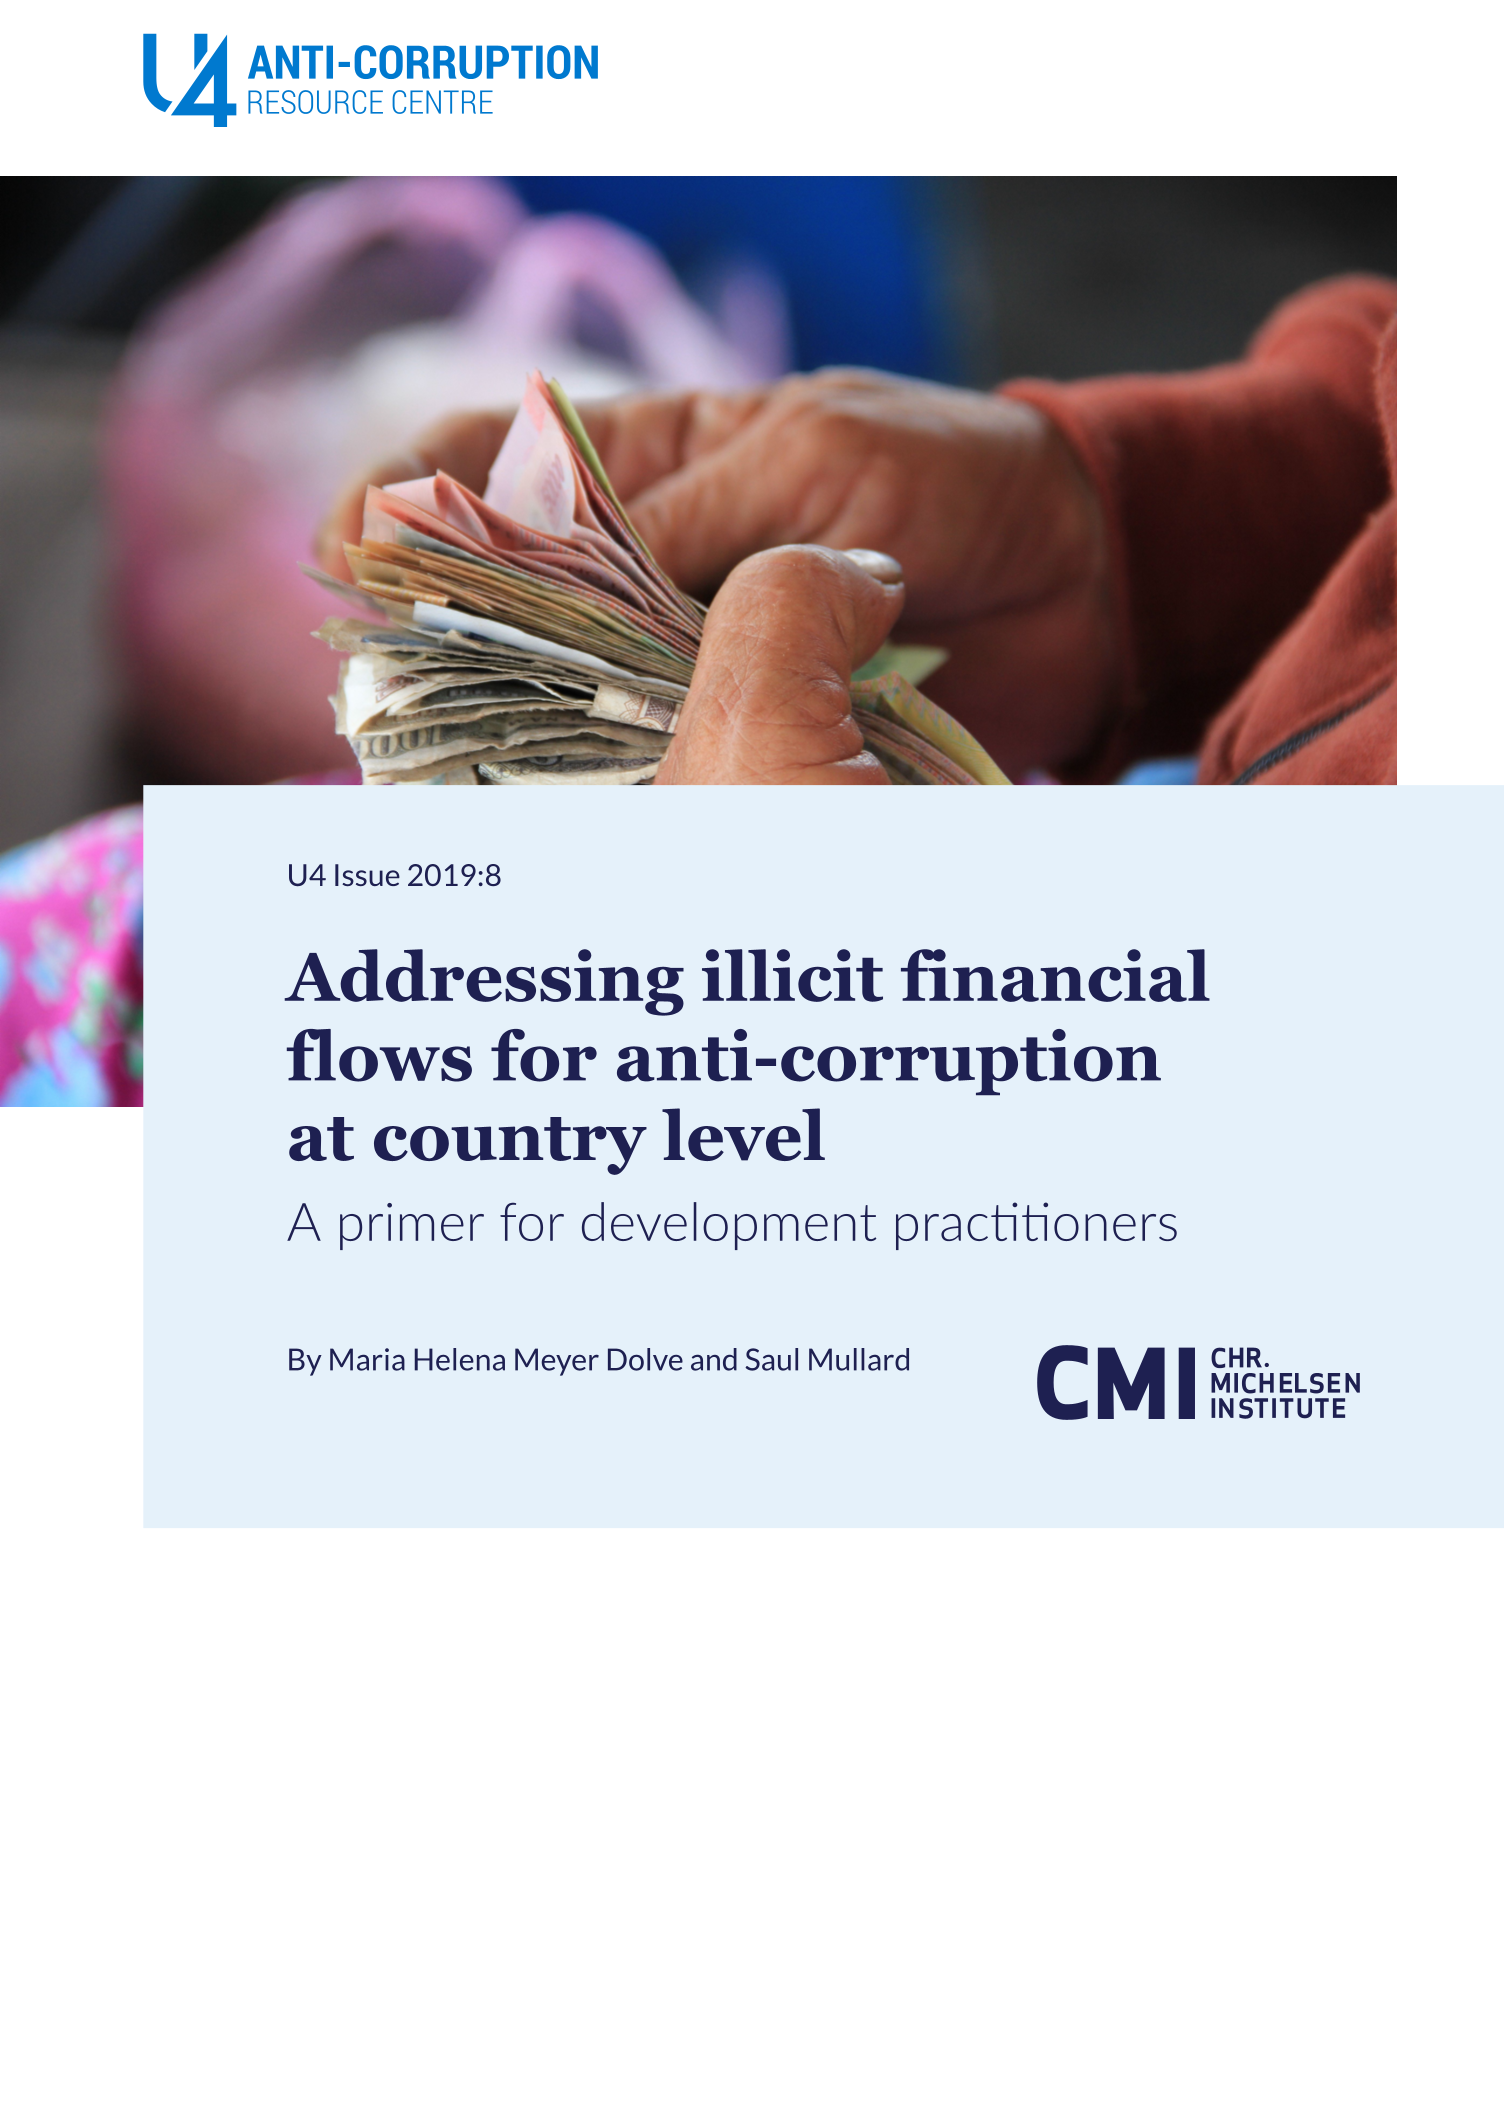 Addressing illicit financial flows for anti-corruption at country level